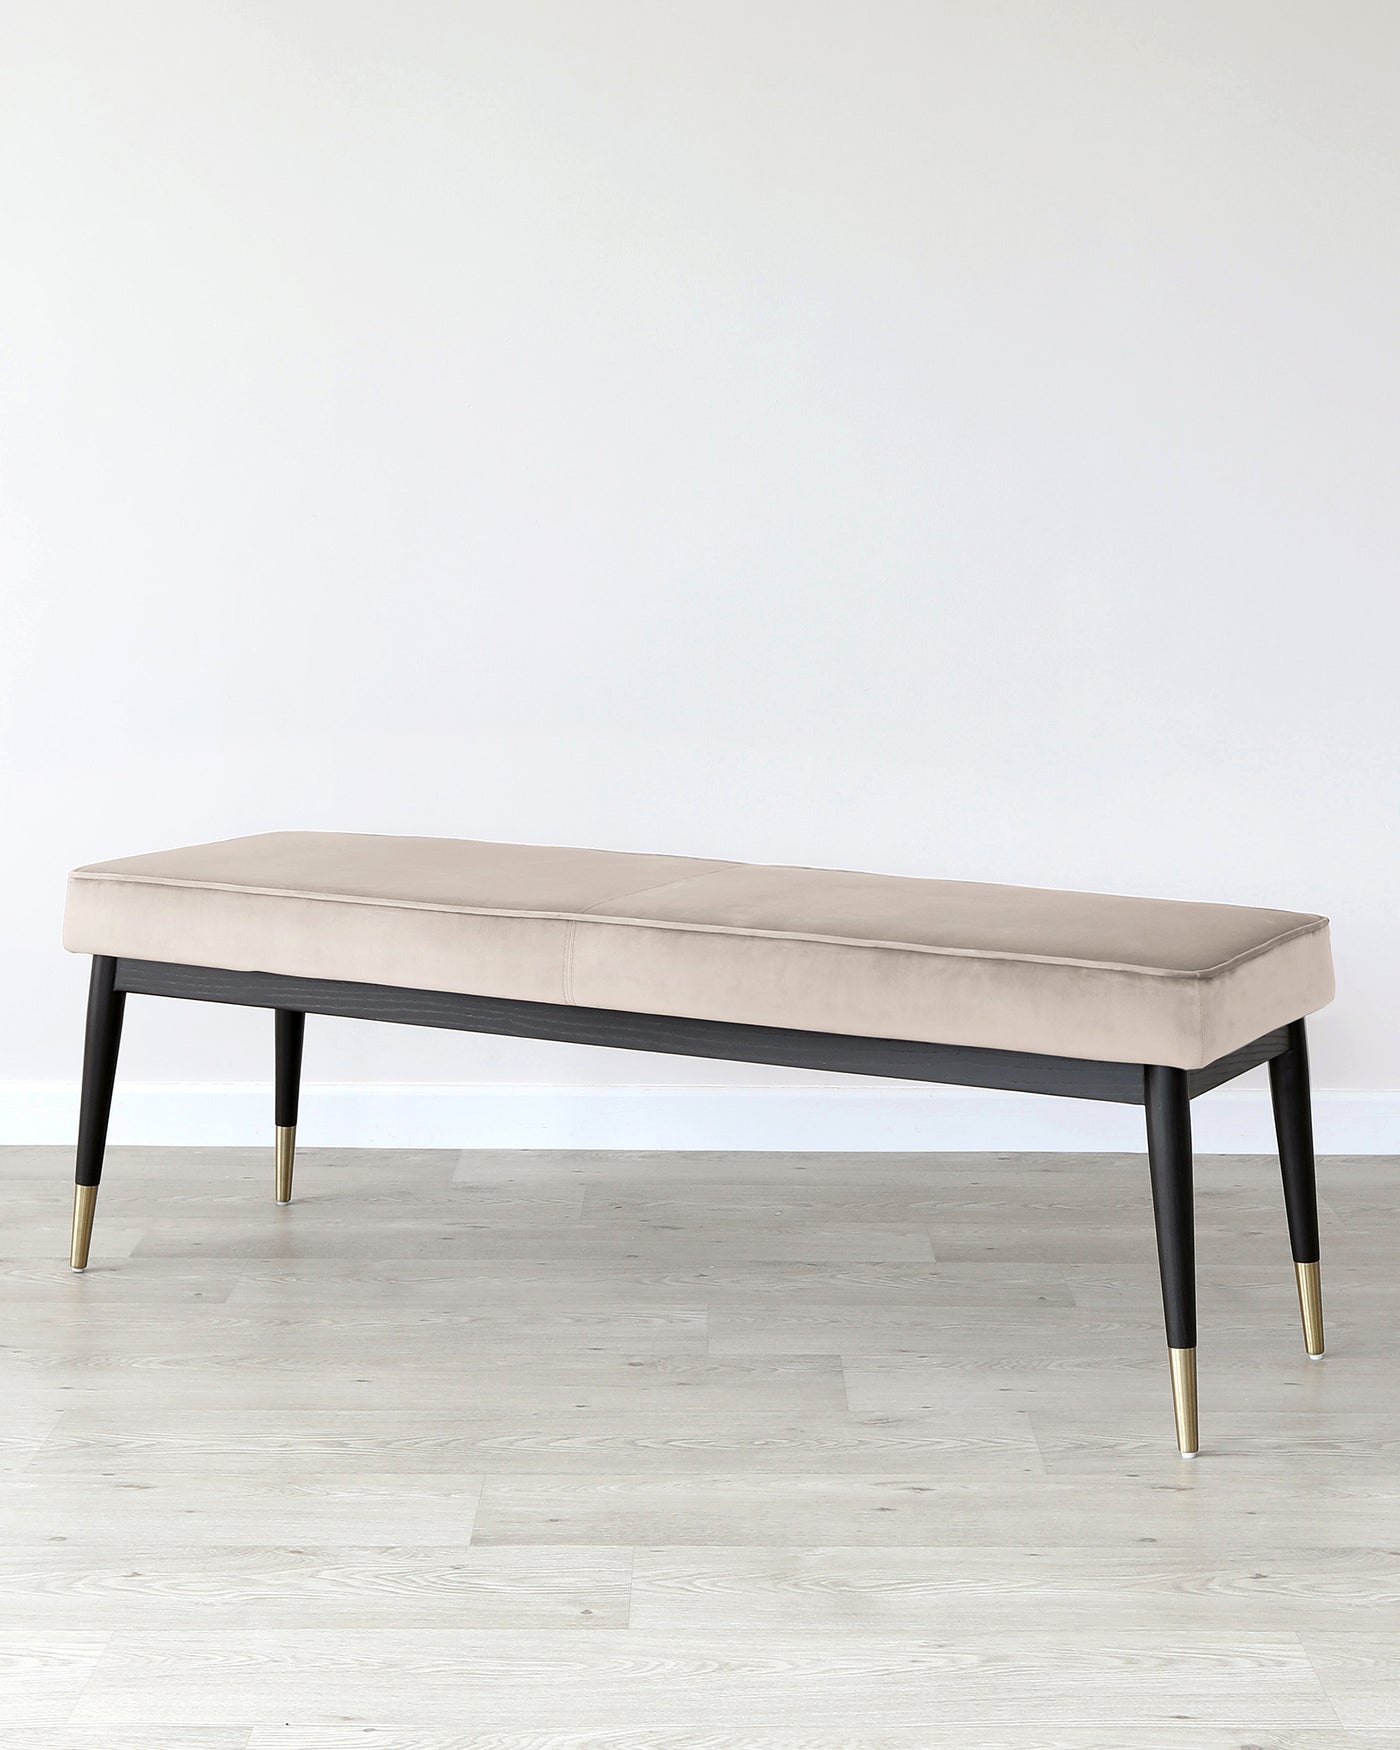 Elegant modern bench with a plush, light beige upholstered cushion on a dark wooden base with black and gold tapered legs, positioned on a light wooden floor against a white wall.